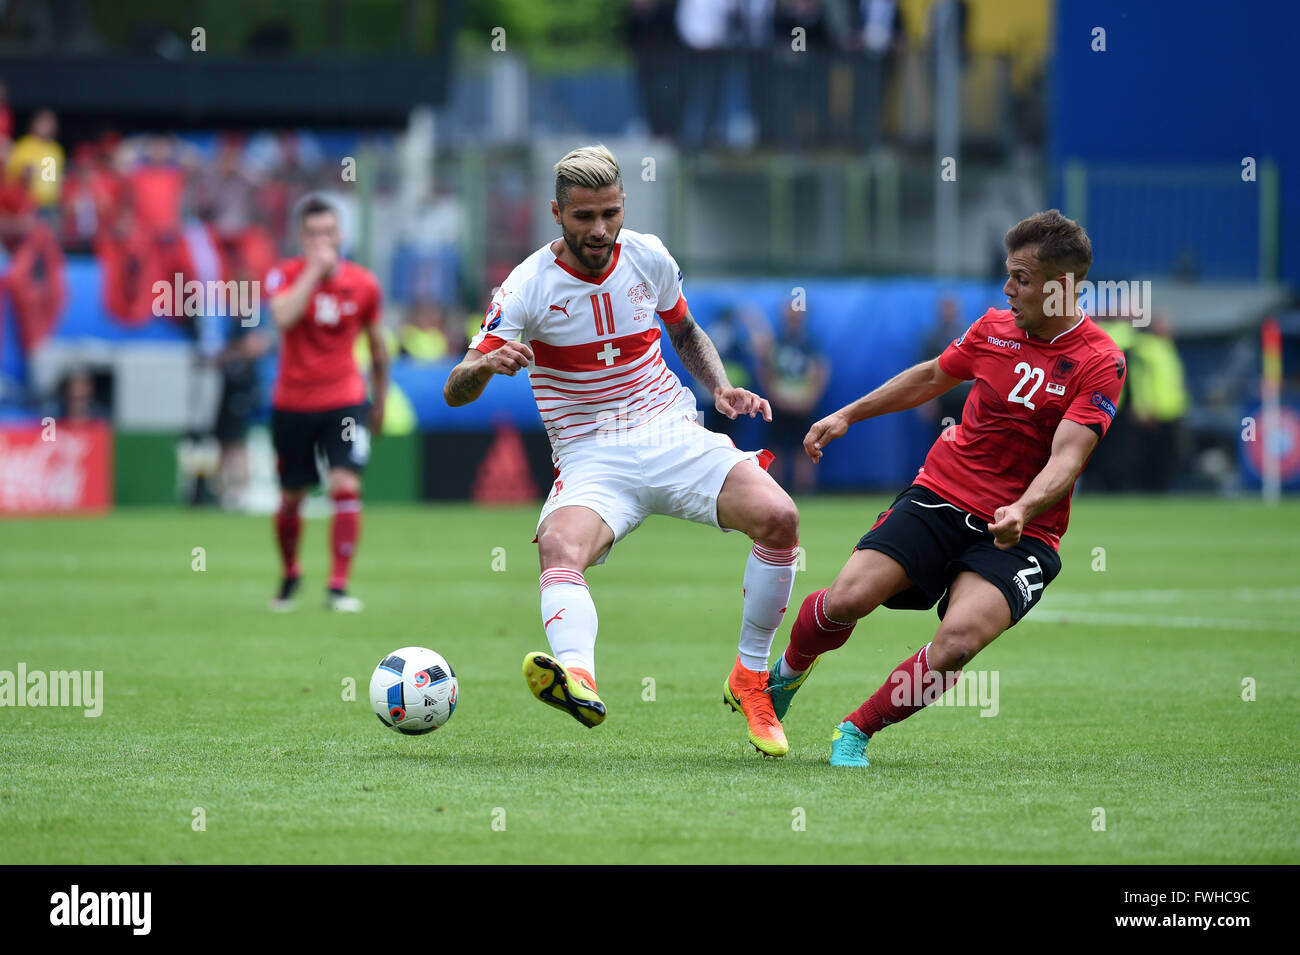 Lens, France. 11th June, 2016. Valon Behrami (SUI), Amir Abrashi (ALB) Football/Soccer : UEFA EURO 2016 Group A match between Albania 0-1 Switzerland at Stade Bollaert-Delelis in Lens, France . © aicfoto/AFLO/Alamy Live News Stock Photo